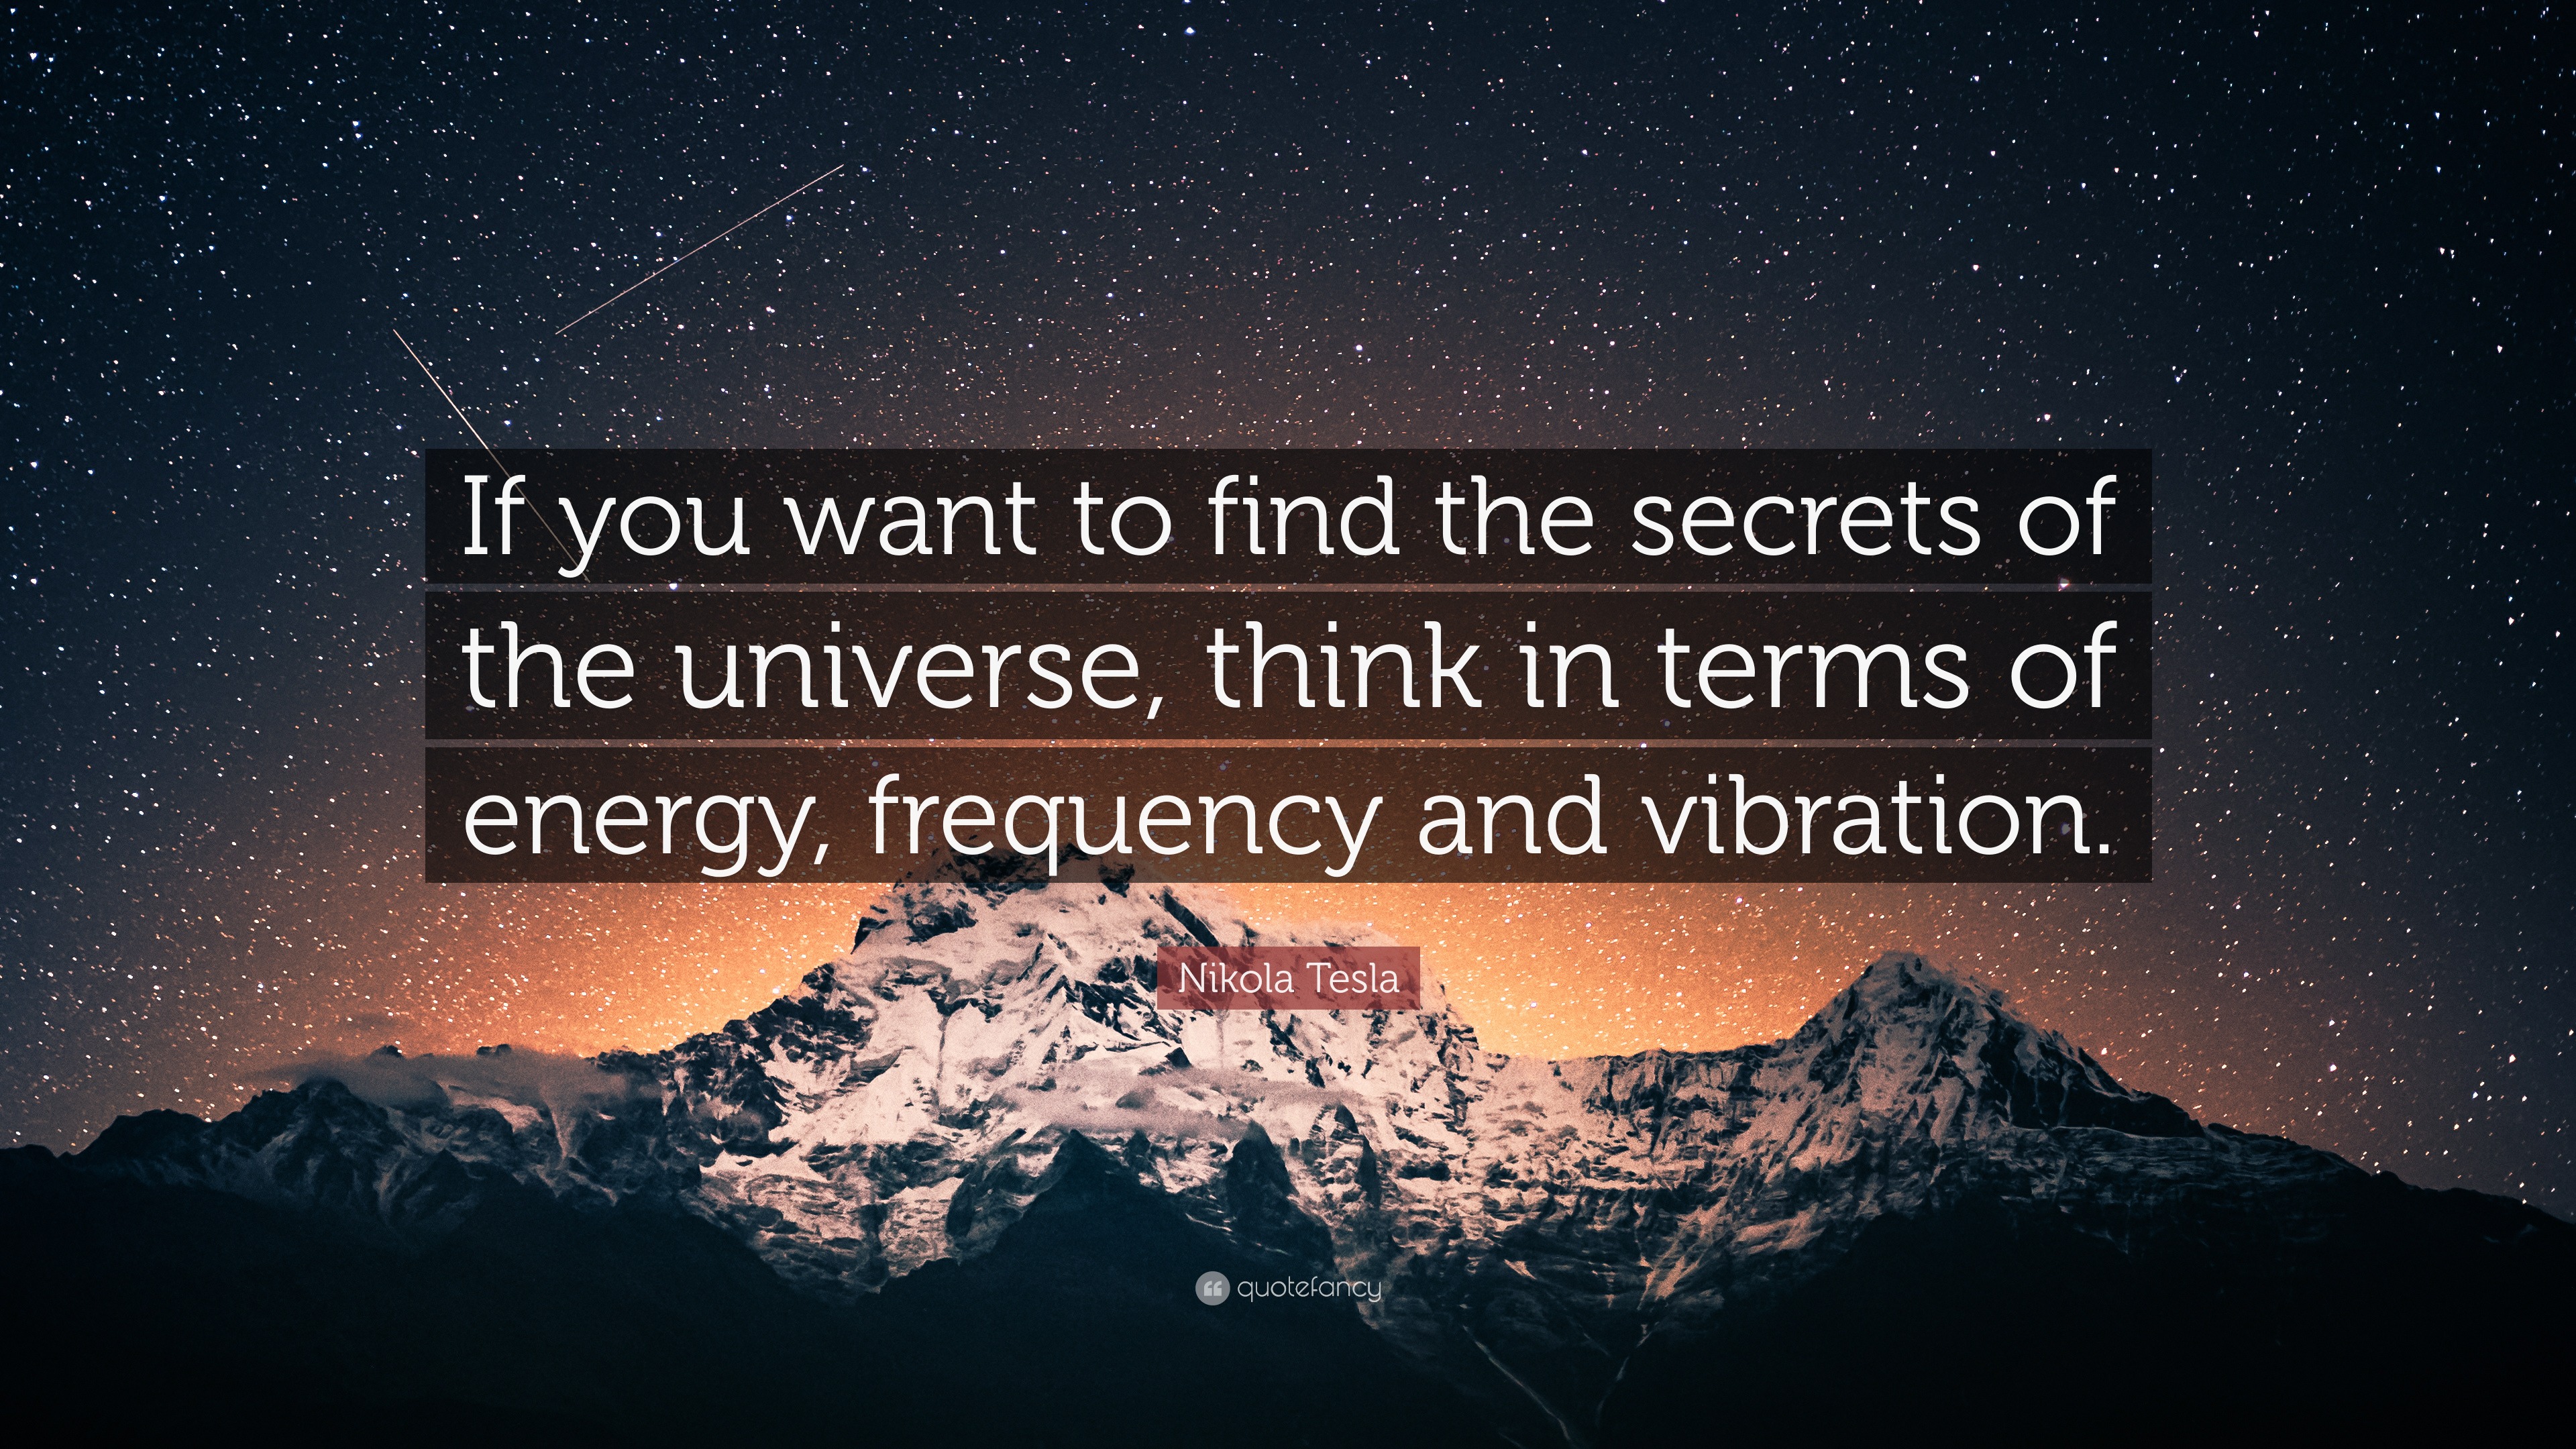 Nikola Tesla Quote: “If you want to find the secrets of the universe